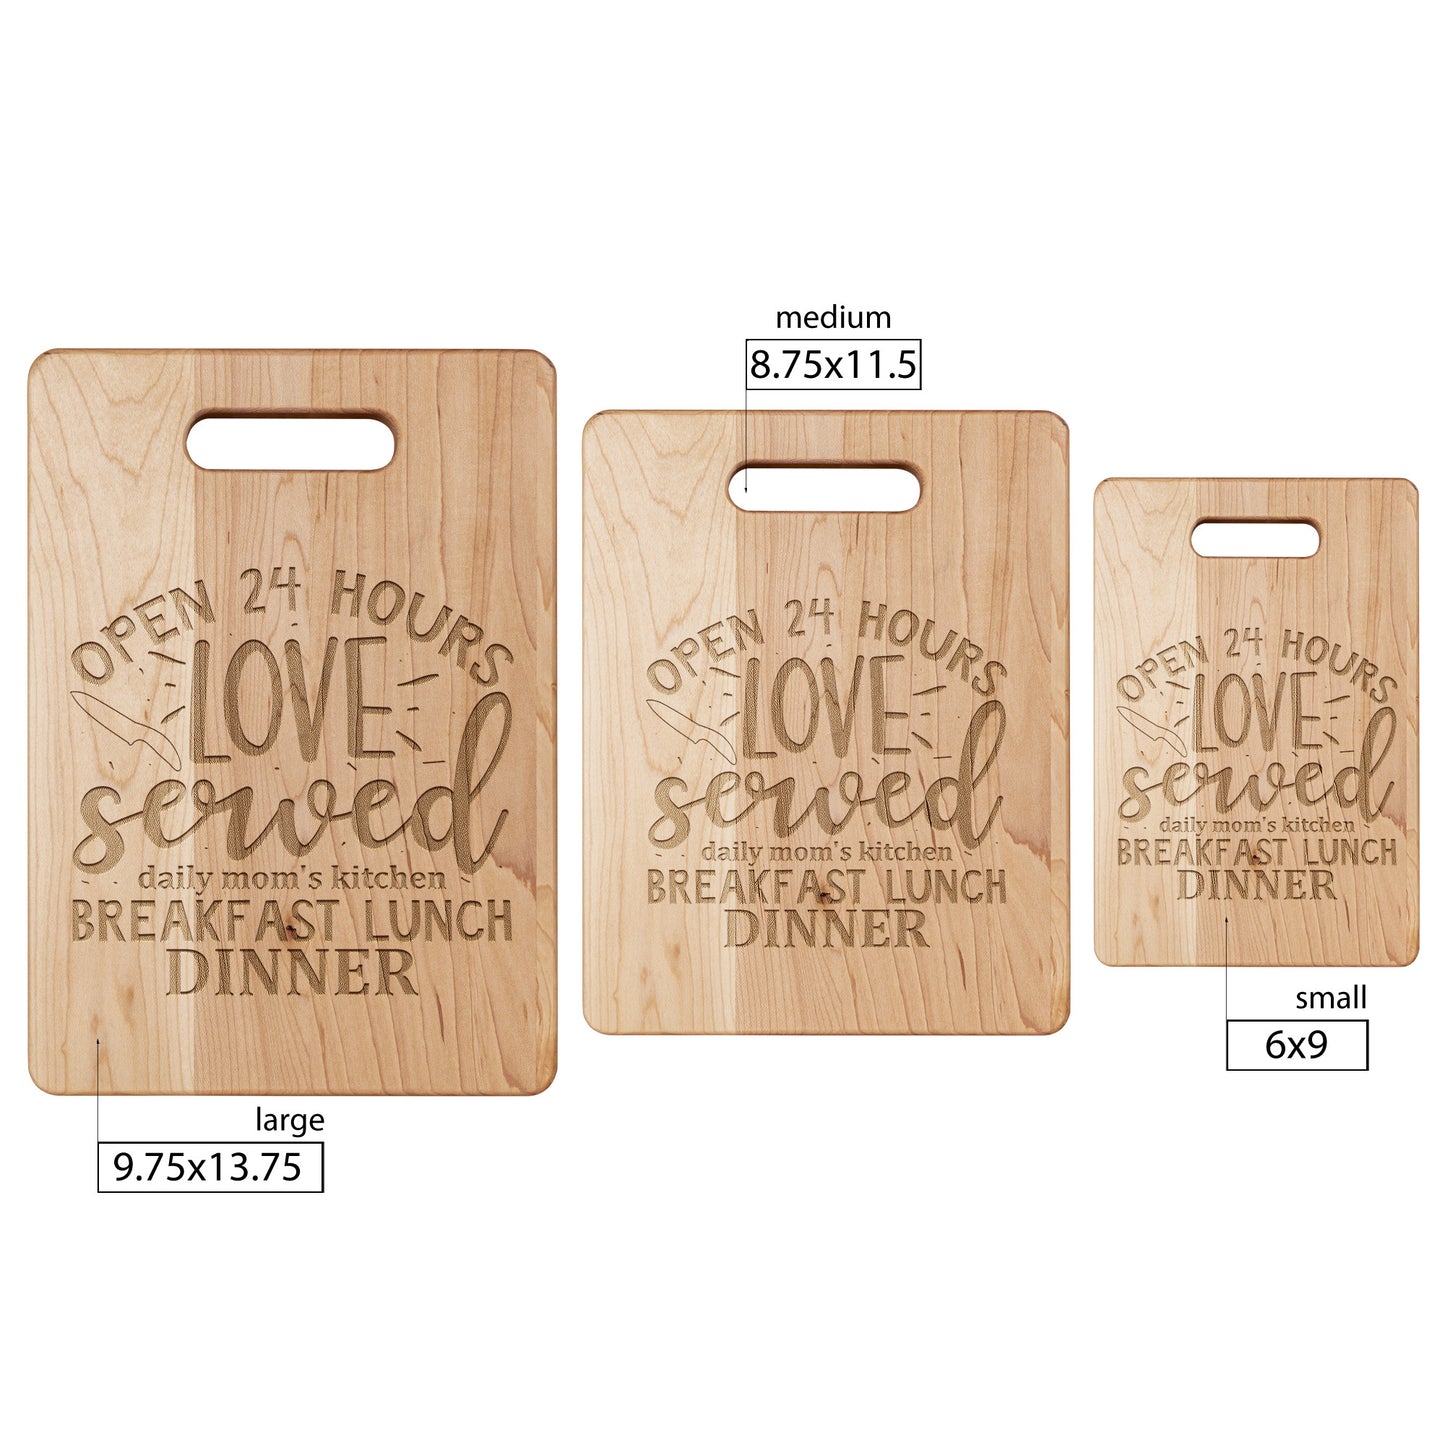 "Love Served 24 Hours" Maple Cutting Board